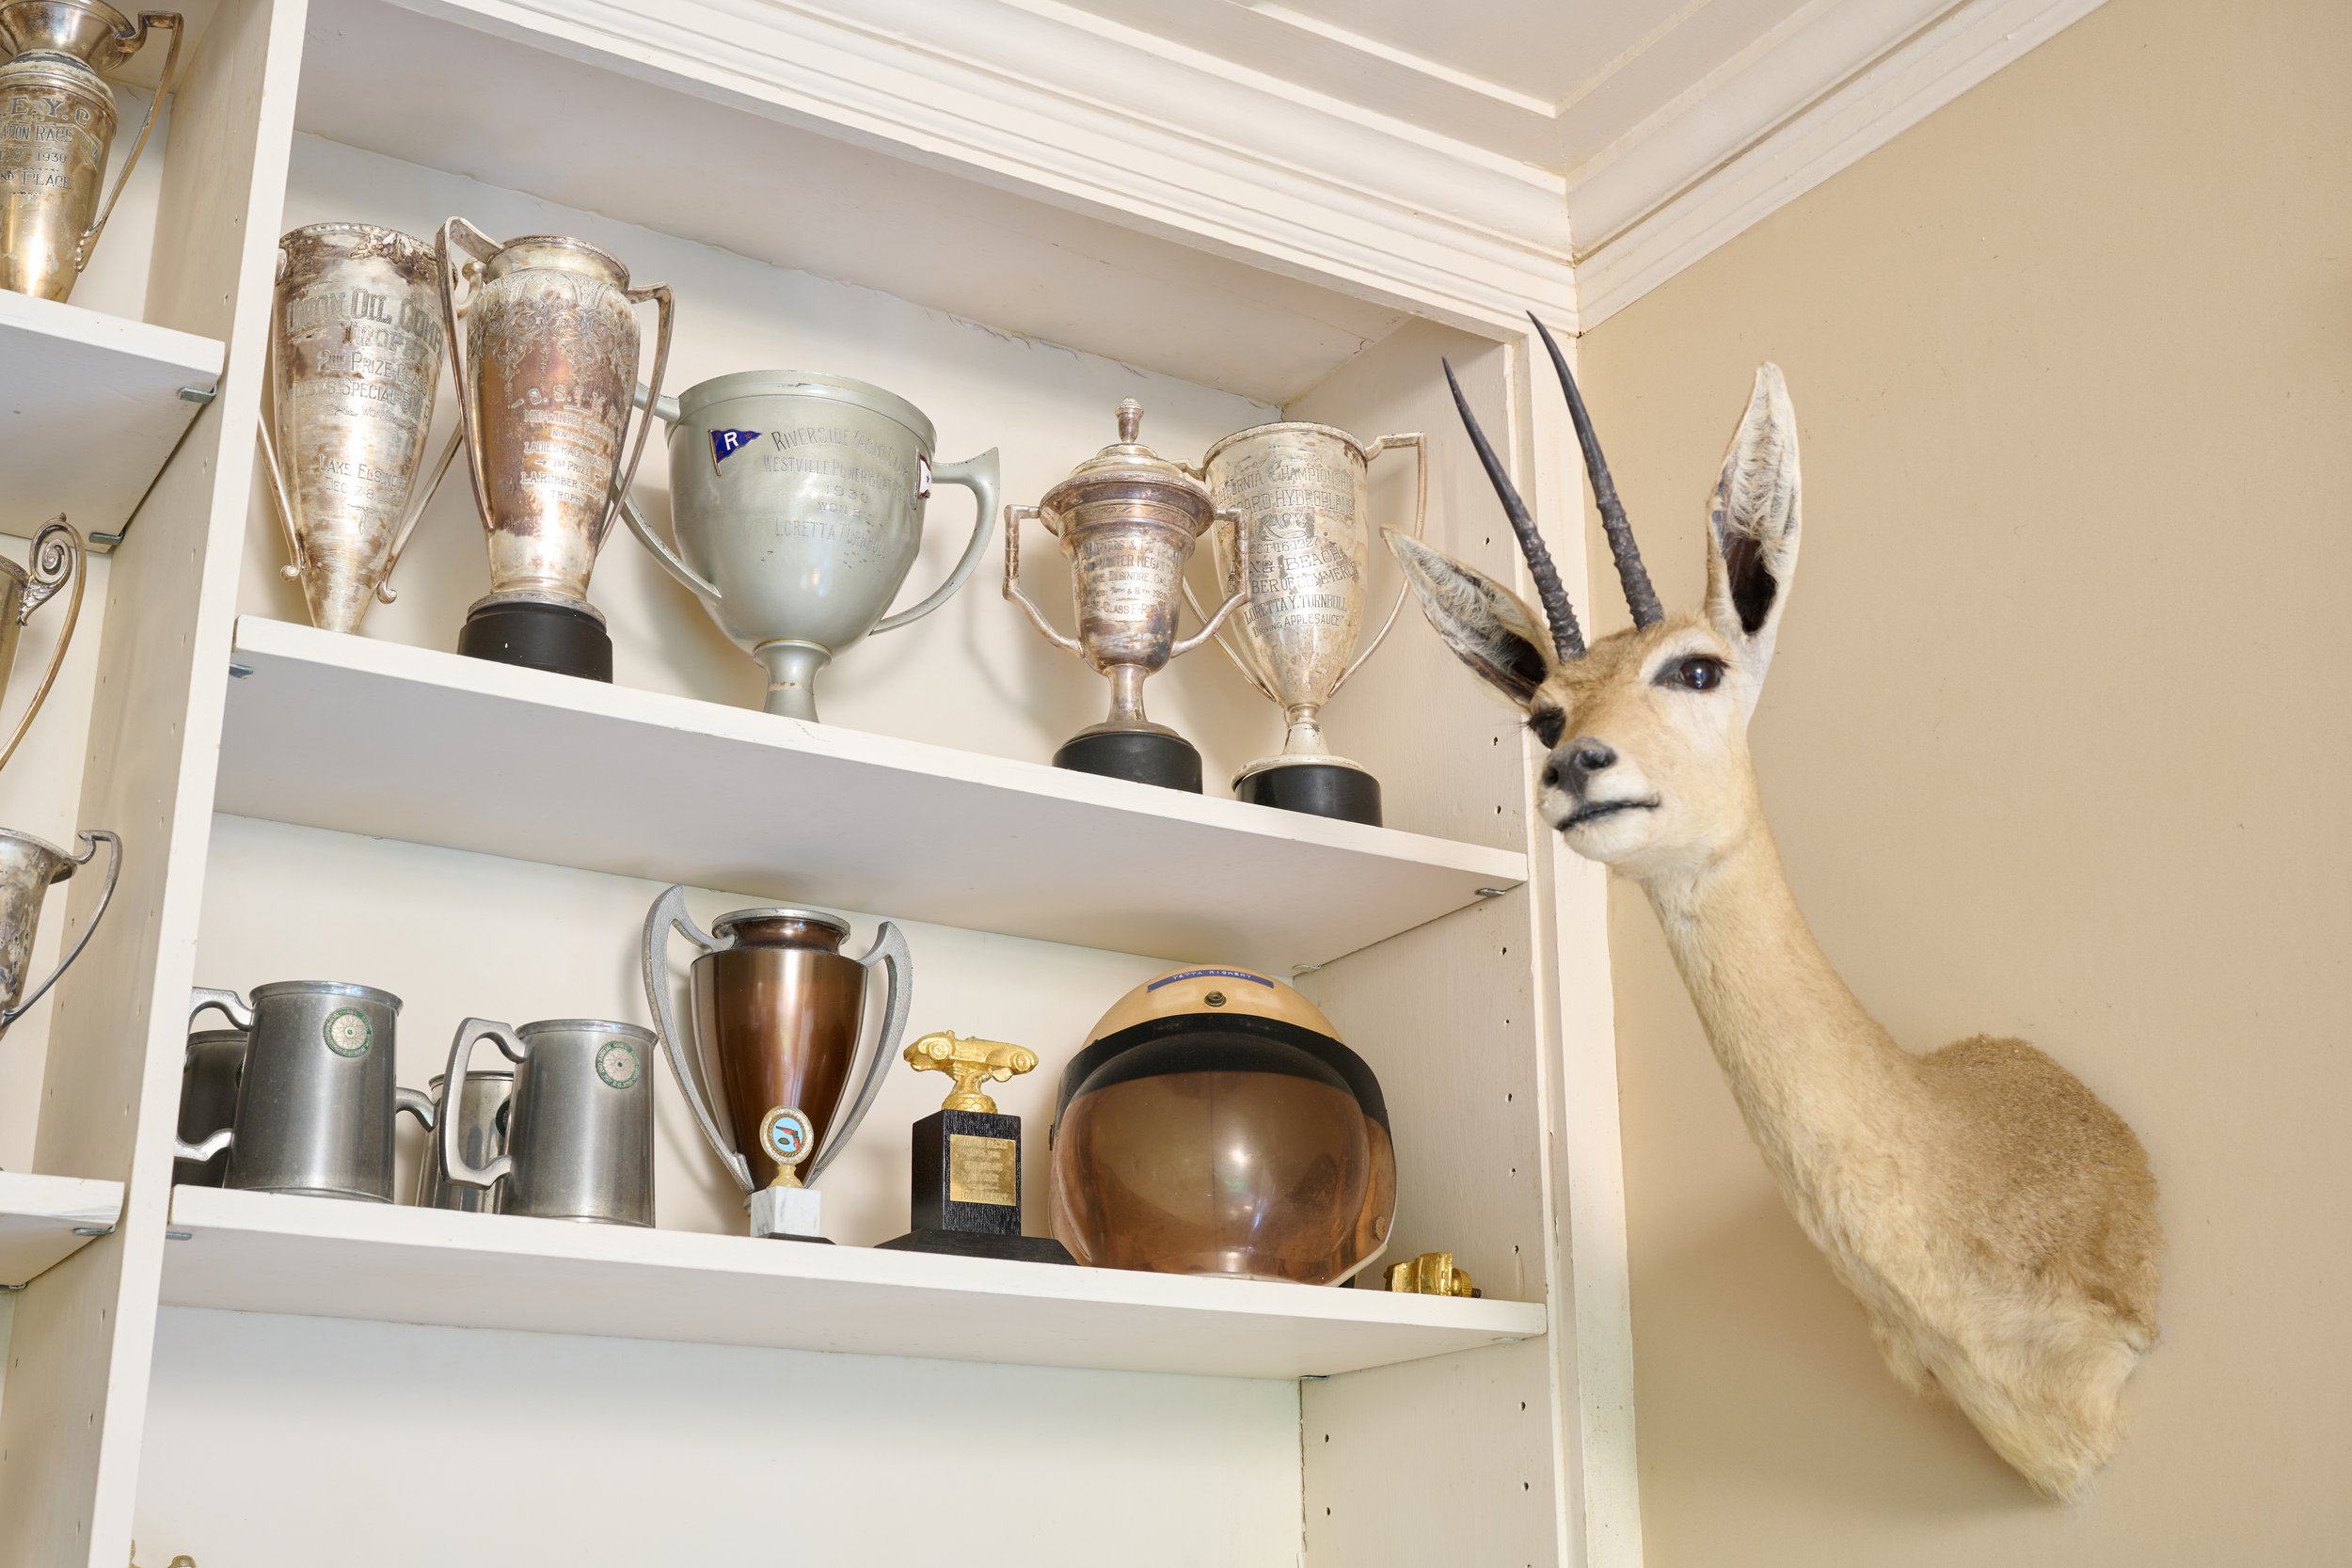  Trophies and sports memorabilia belonging to boat and car racer Loretta Turnbull Richert are proudly on display in daughter Tiare Richert Finney’s home in Nu‘uanu.    Photos by David Murphey  